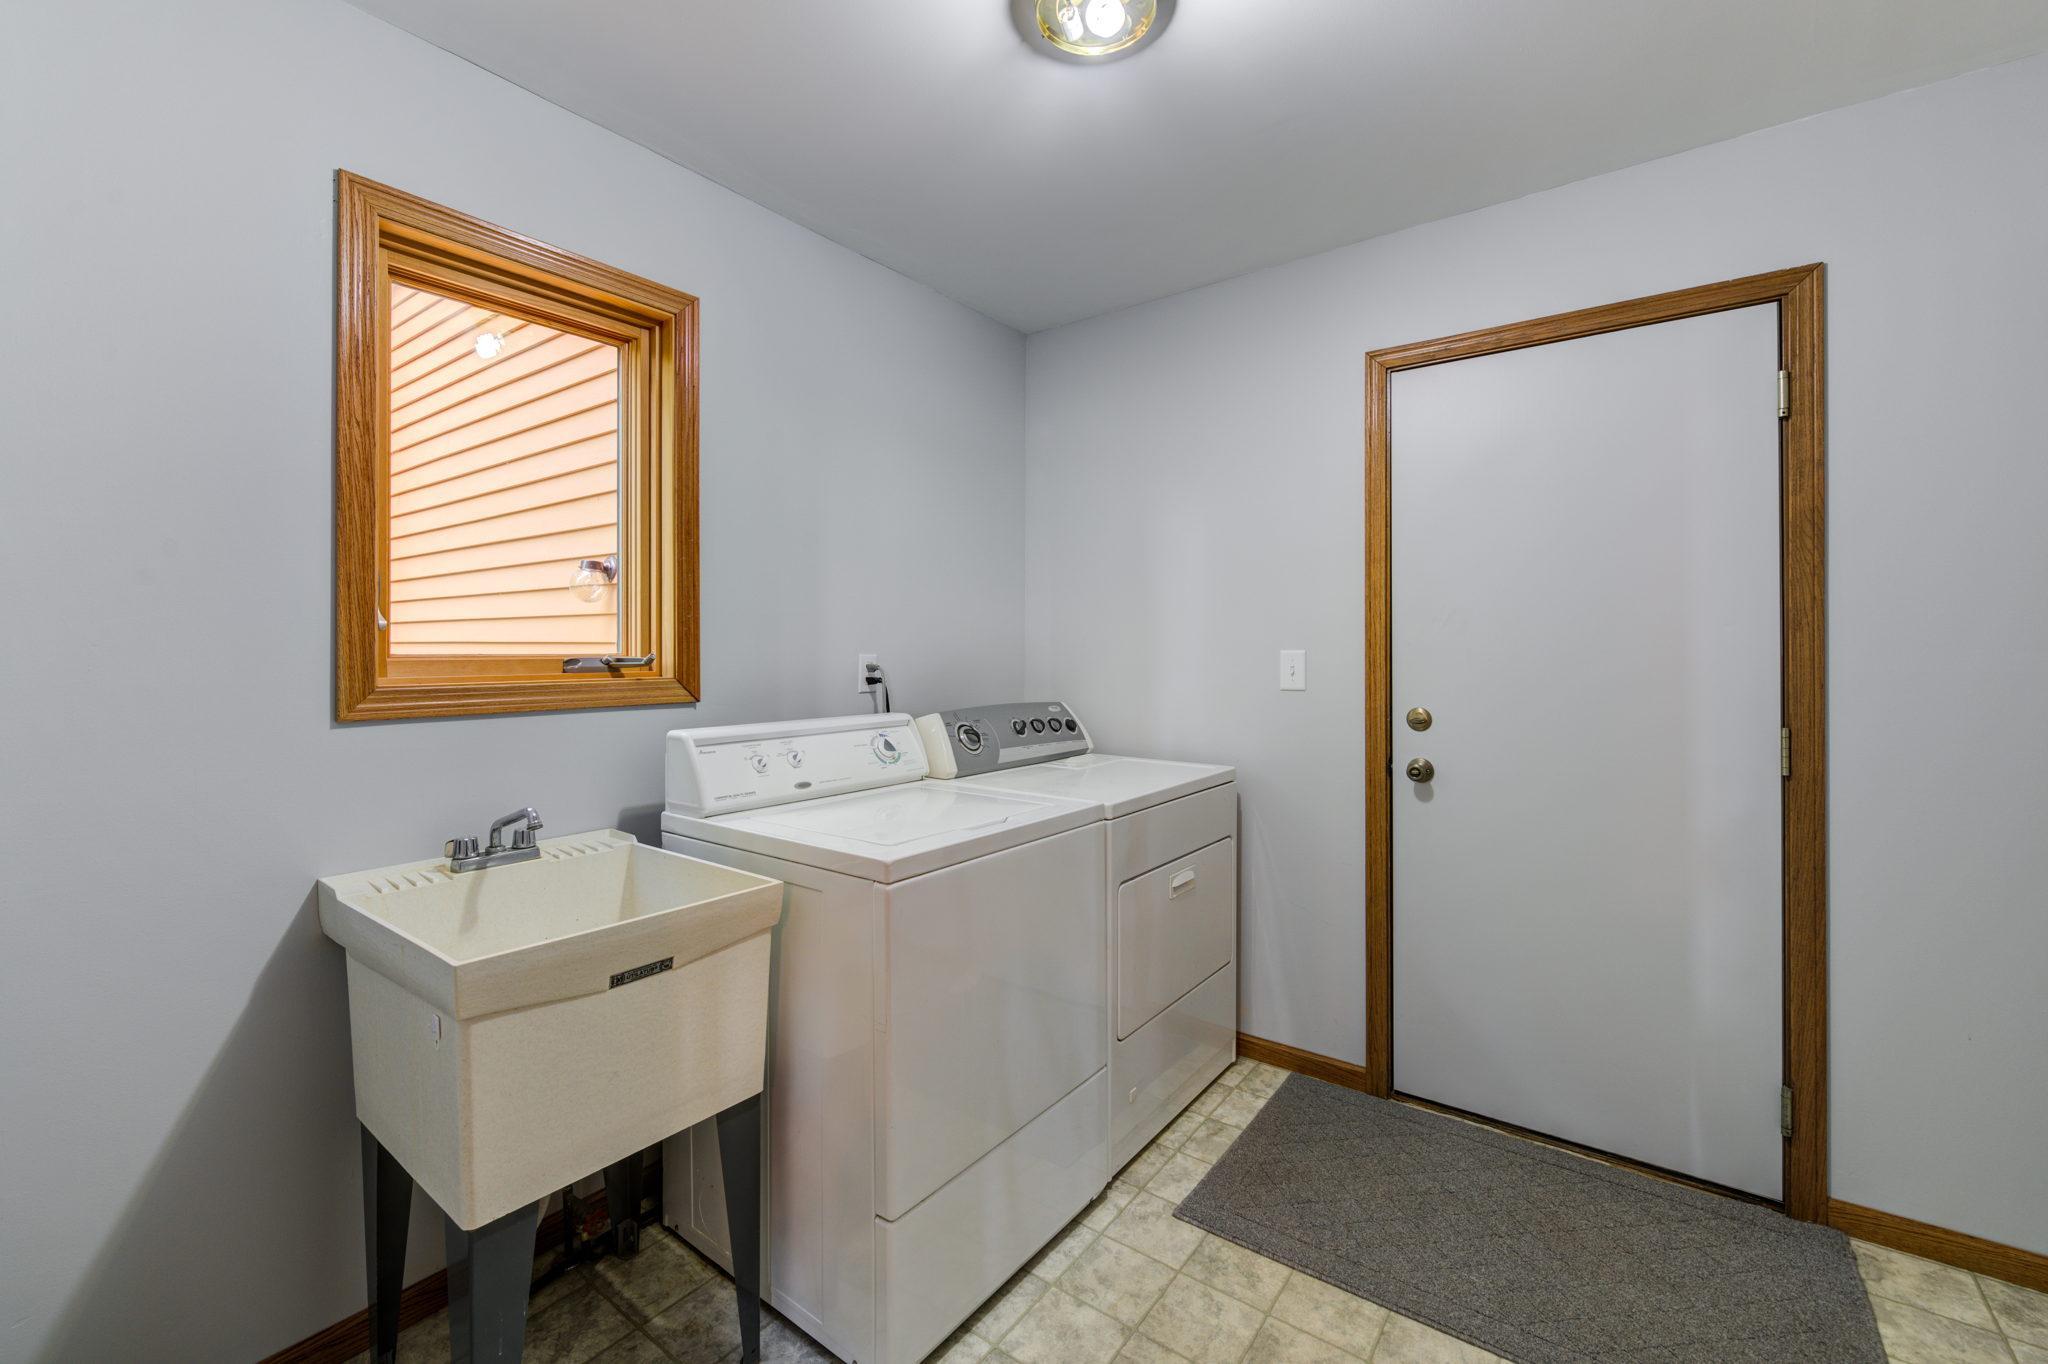 You will love the large mud-room as you enter from the attached garage features a nice sized closet as well as the laundry with large soaker wash tub.